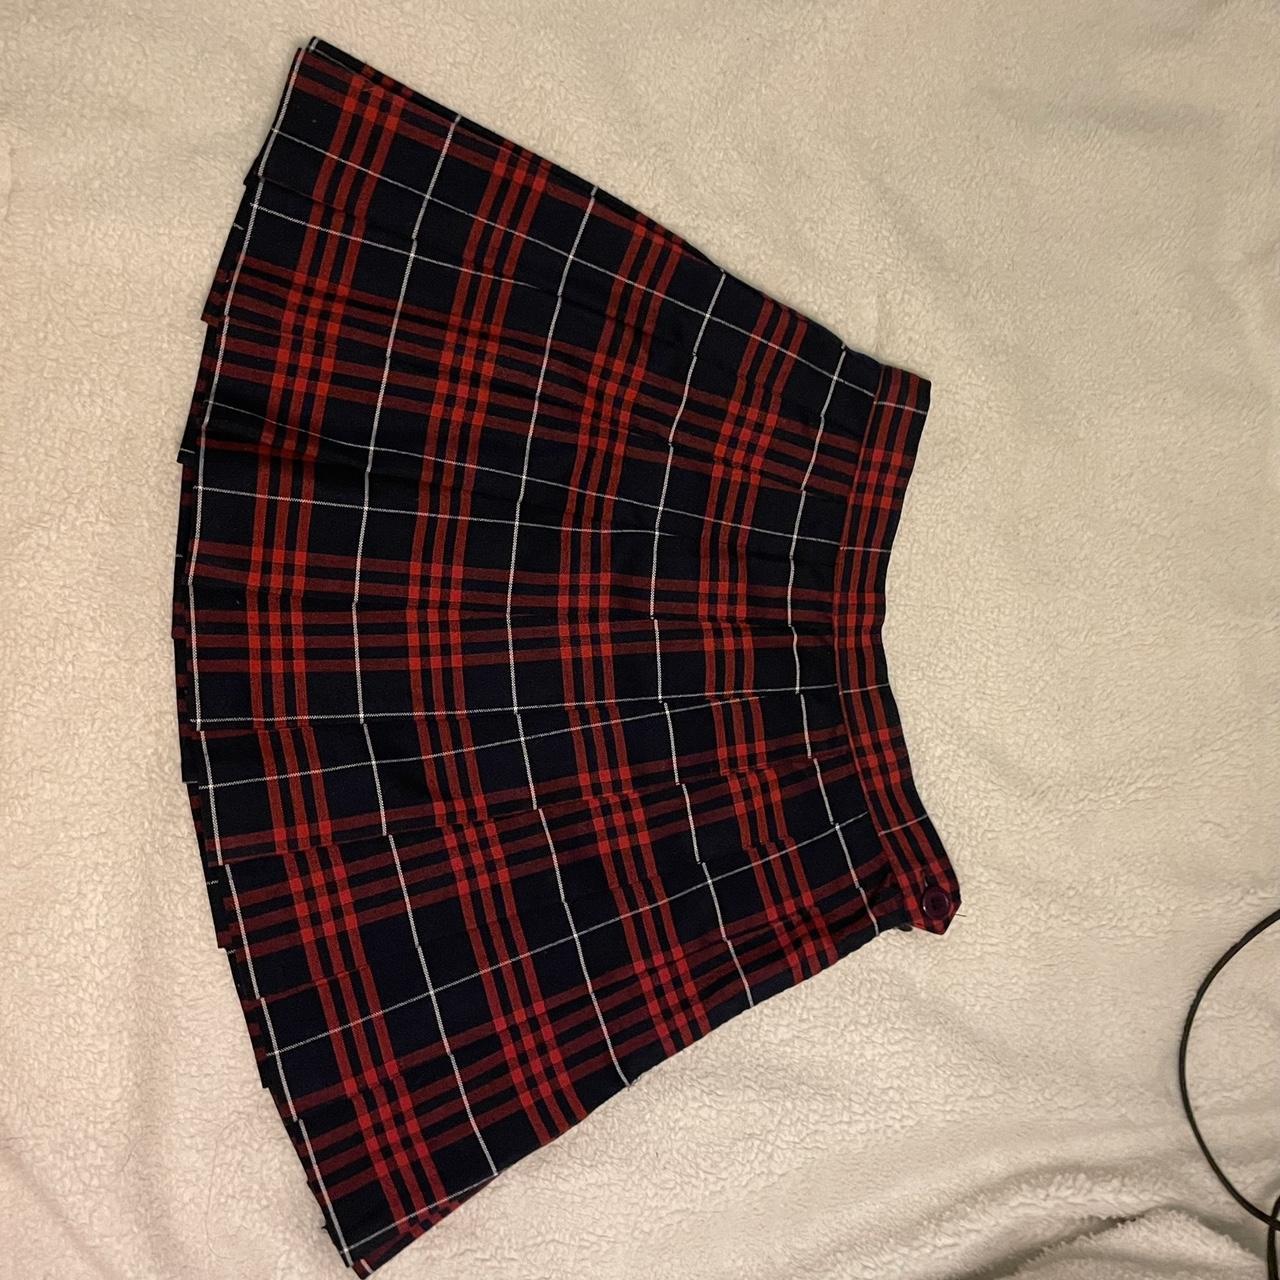 American Apparel Women's Navy and Red Skirt (4)